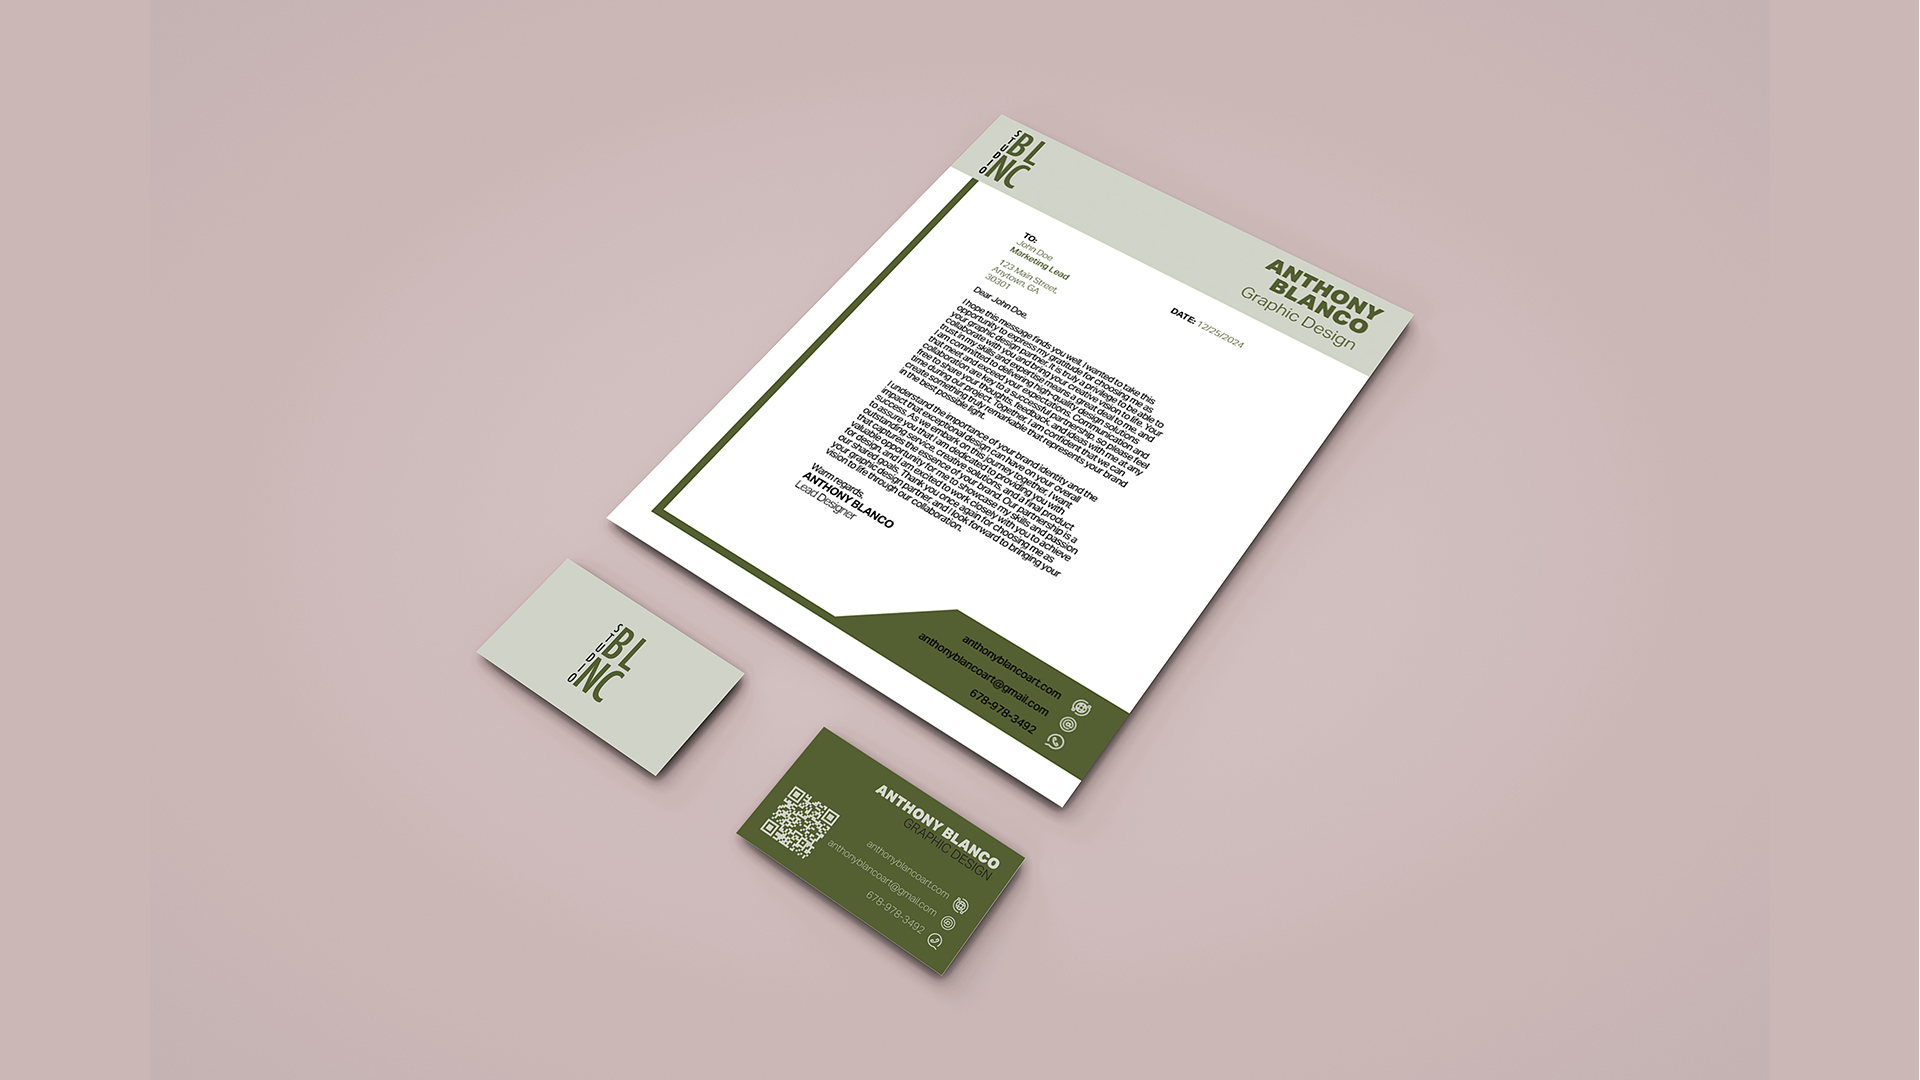 Studio BLNC Branding / “Studio BLNC Branding,” 8.5 x 11 inches print letterhead and business card, 2024. This letterhead and business card is to be used by Studio BLNC.